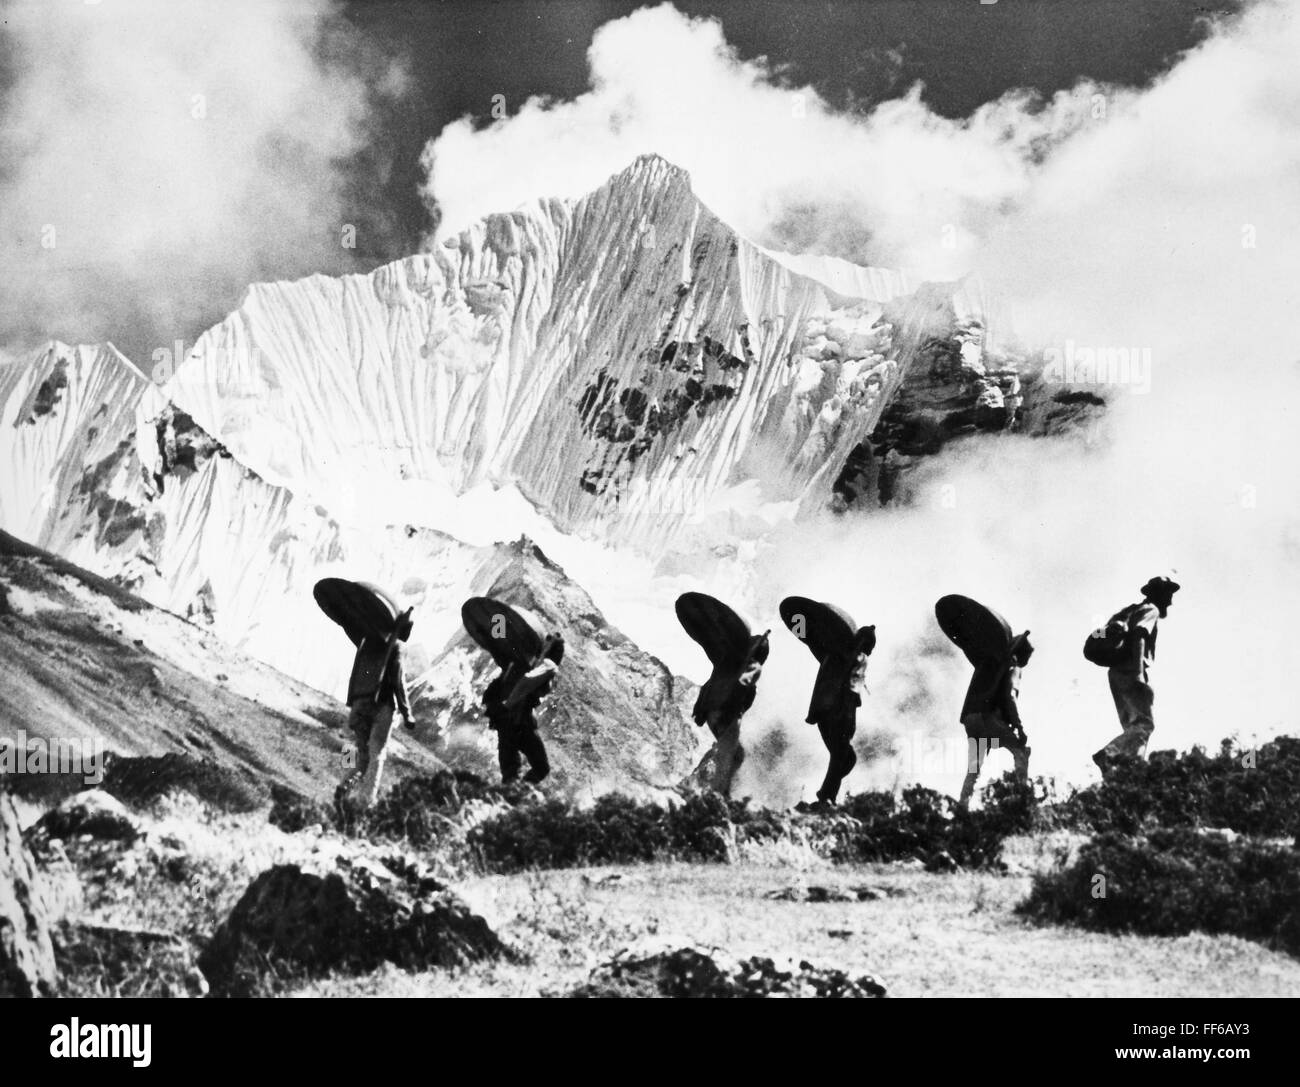 HIMALAYAN SURVEY, 1958. /nSwiss geologist Toni Hagen leading porters on a 1958 surveying expedition on behalf of the government of Nepal, near the Gangja La in the Langtang Valley in the Himalayan ranges of Nepal. Stock Photo